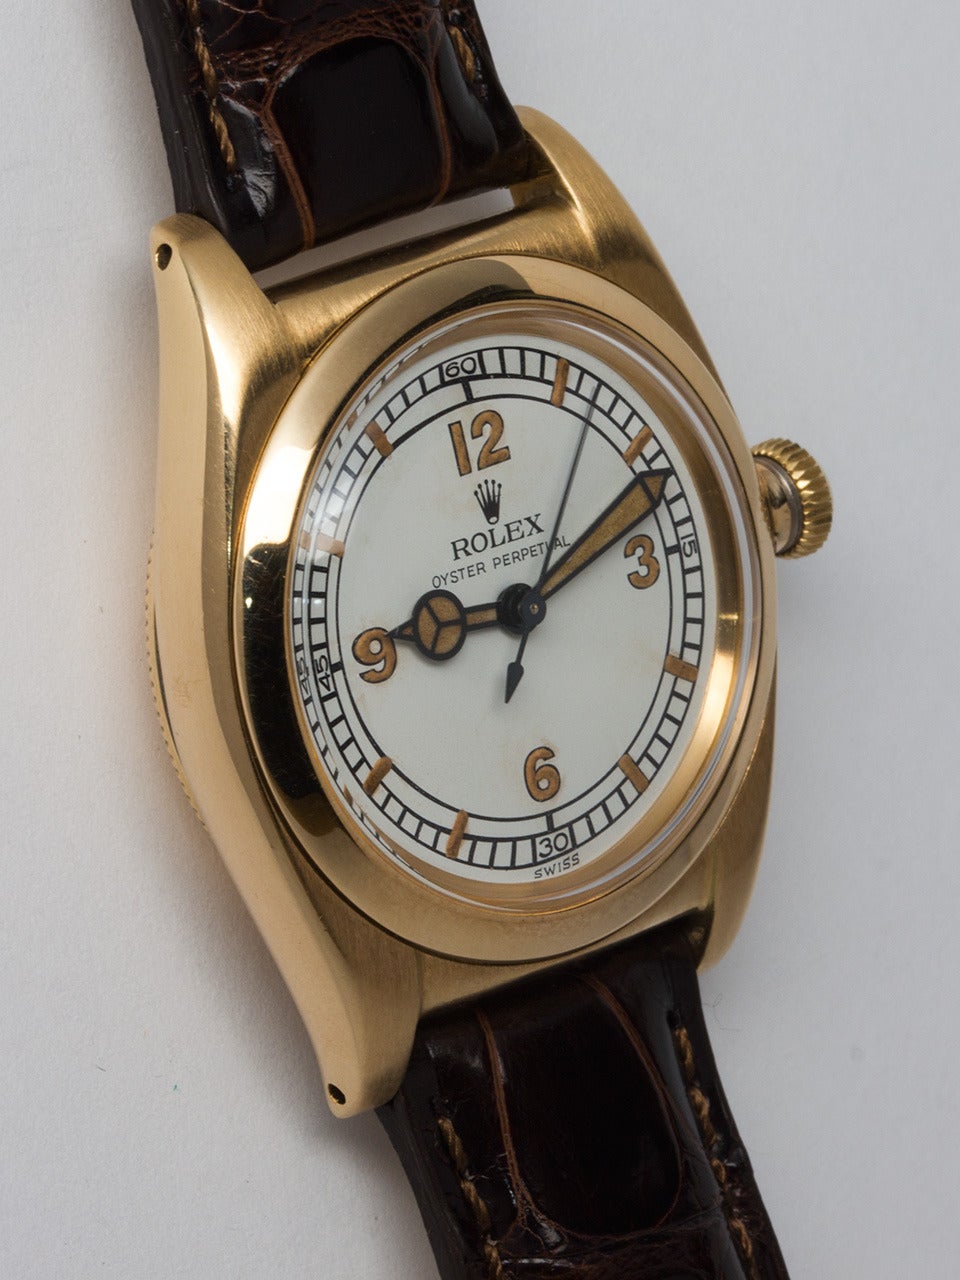 Rolex 14K Yellow Gold Bubbleback Wristwatch, Ref. 3131, circa 1939. 32 x 40mm tonneau Oyster case with smooth bezel and screw down period style crown. Featuring beautifully restored white dial with Arabic numerals and baton indexes, matching